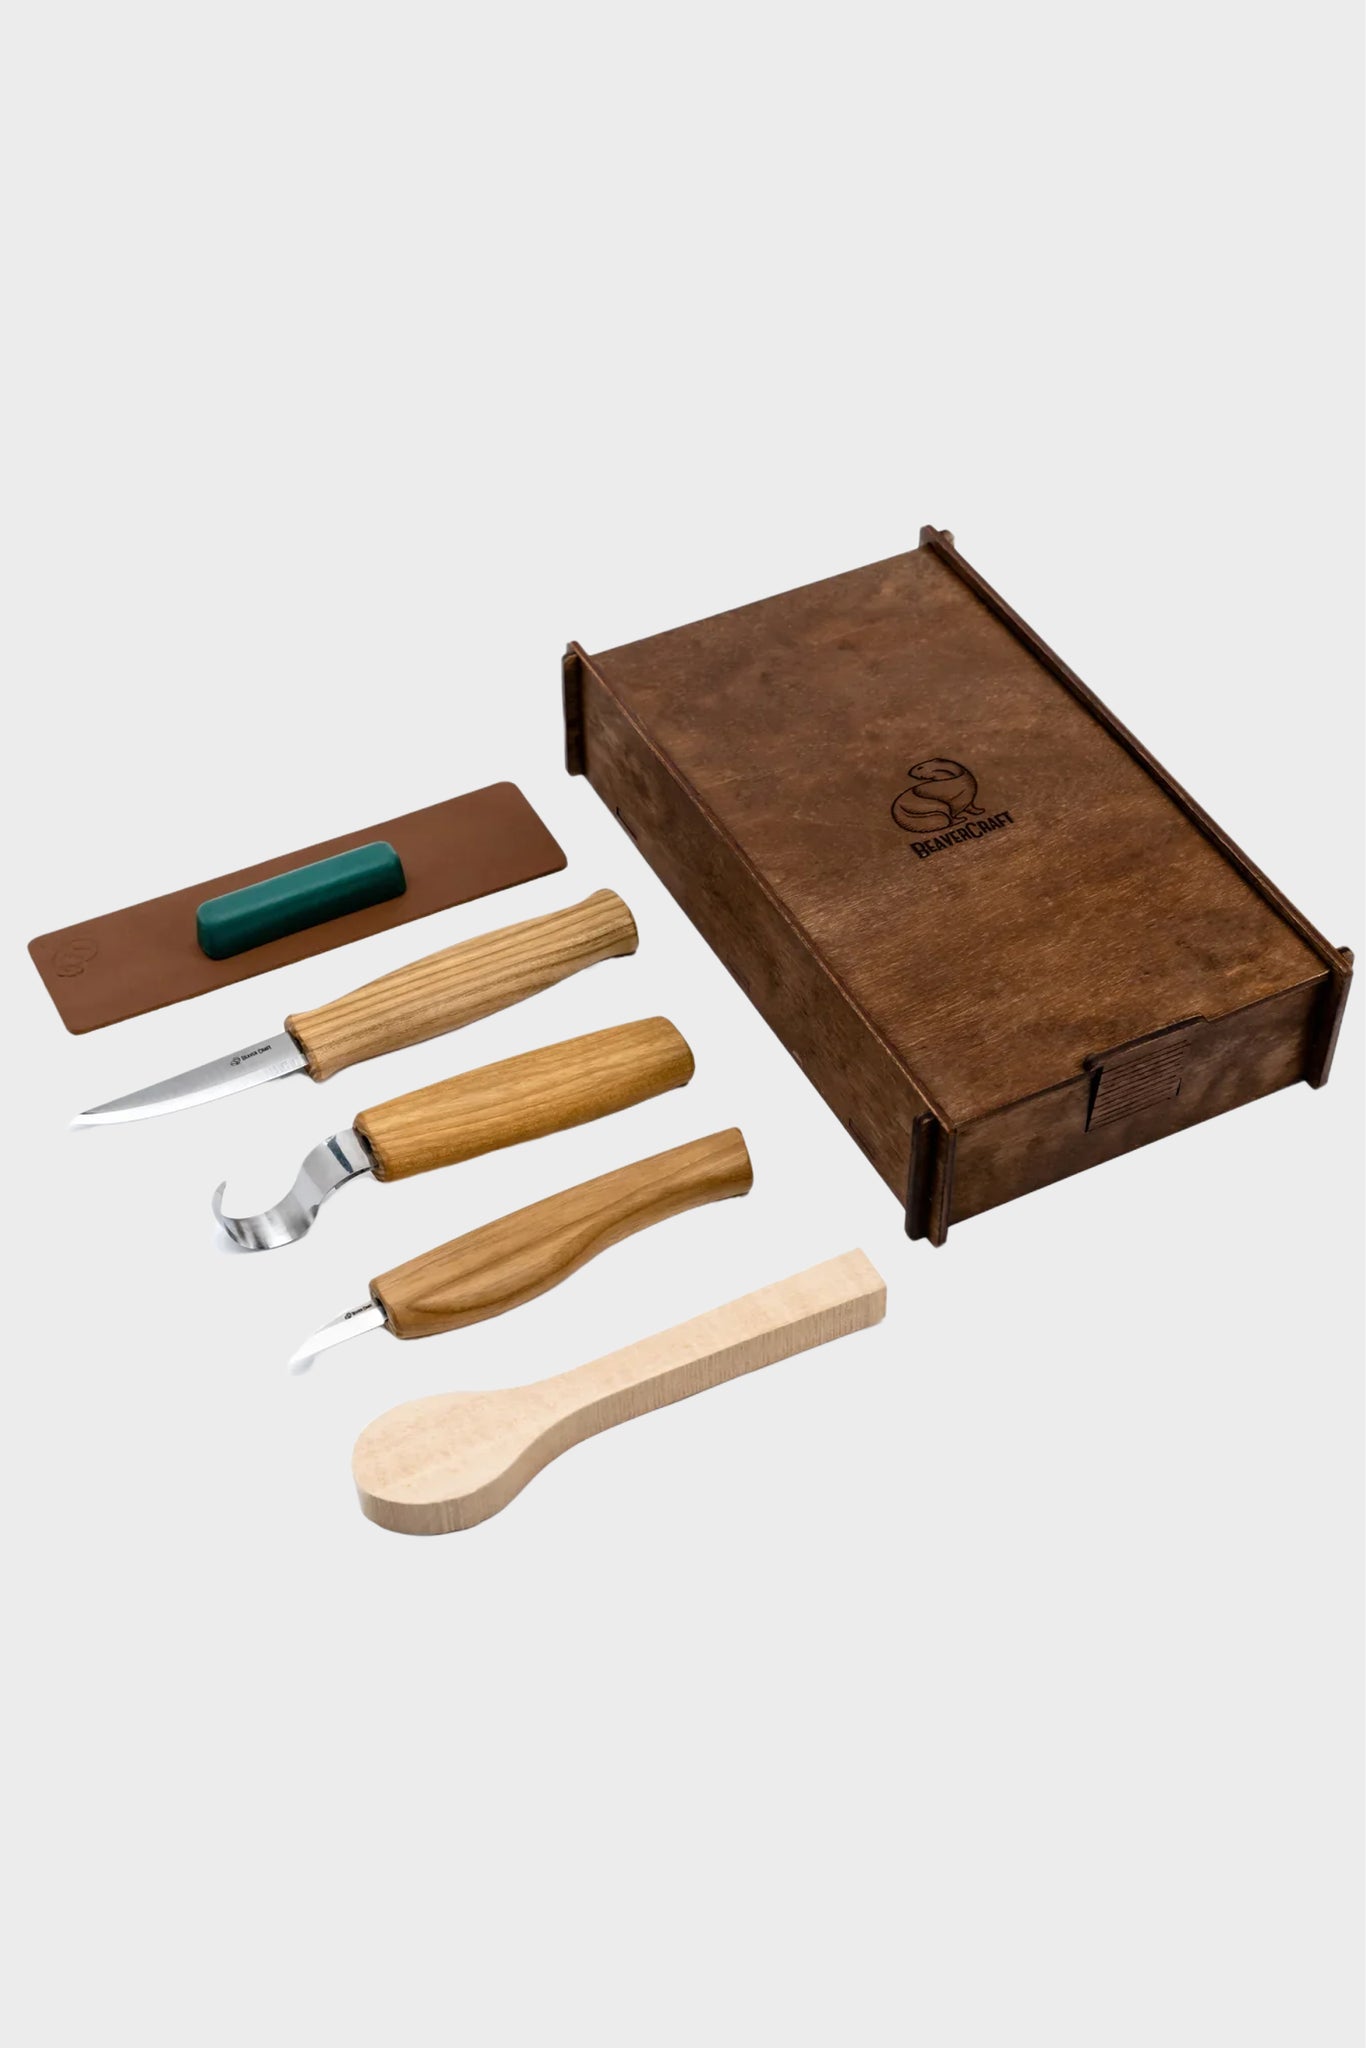 Spoon Carving Kit in a Box – Yesterday Store